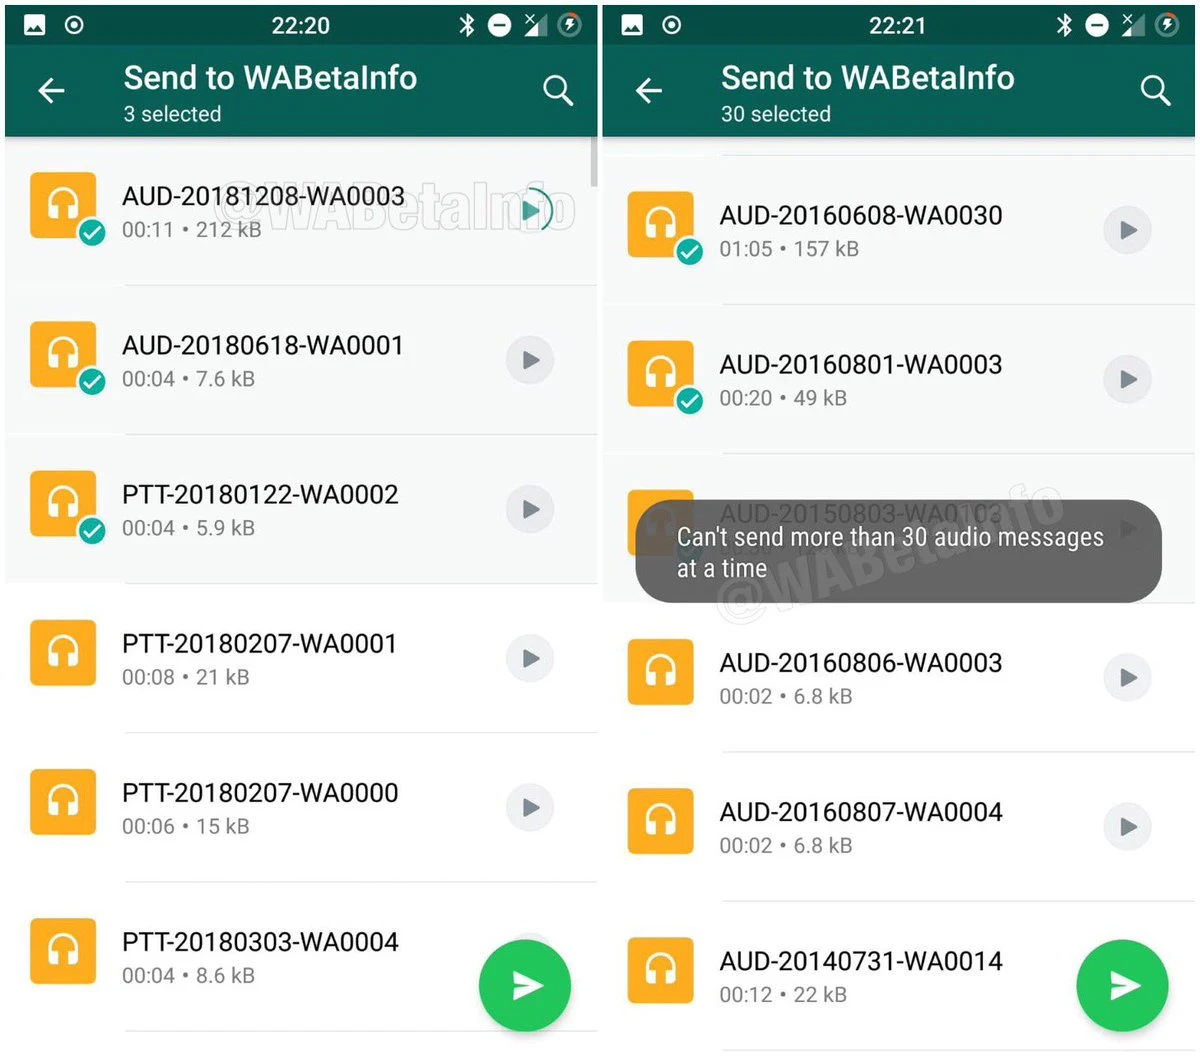 WhatsApp is working on a new redesigned section to send audio files to contact list. It supports audio preview and image preview of the audio file (if available). Max 30 audio messages at a time can be sent.